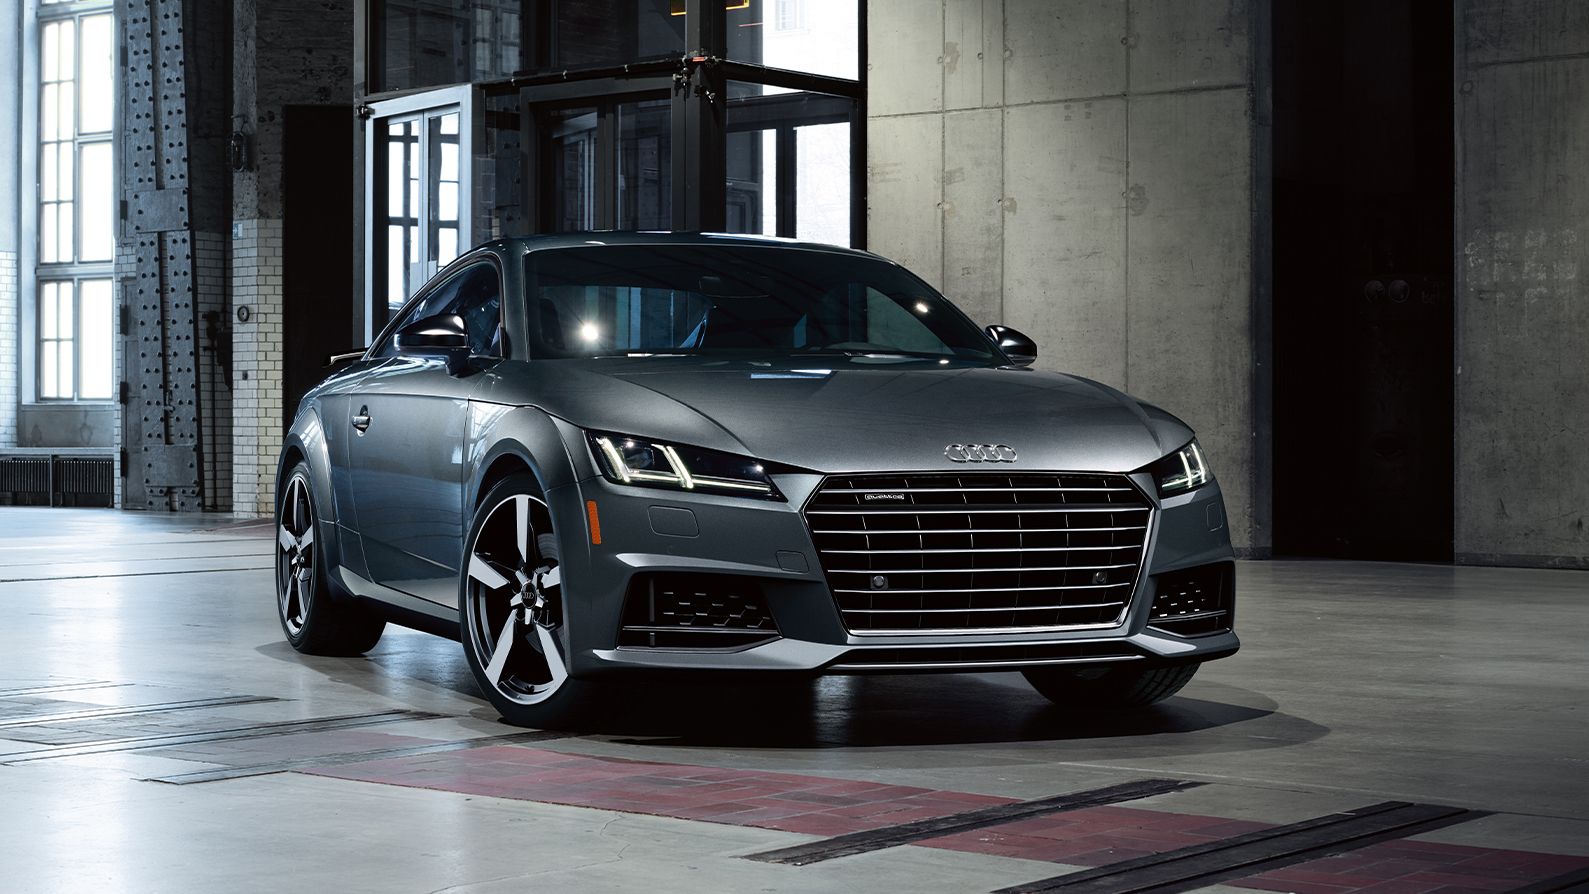 2022 Audi TT / TTS Review, Pricing, and Specs